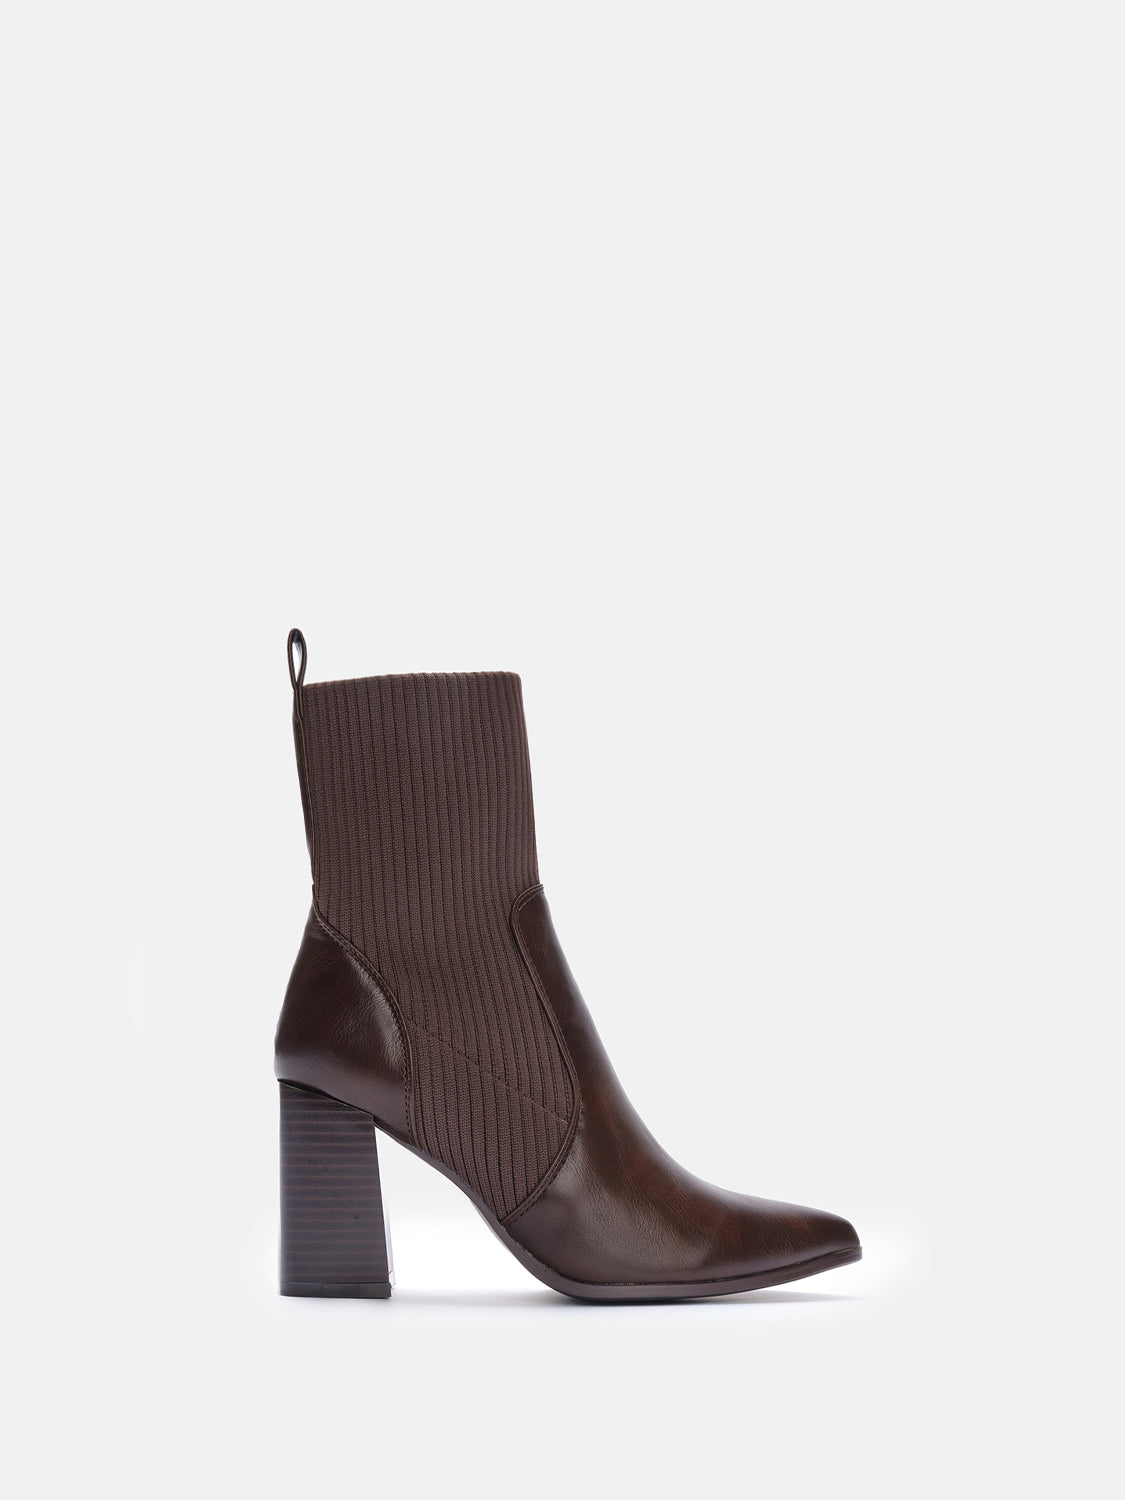 Combined ankle boot heel 8 - BROWN